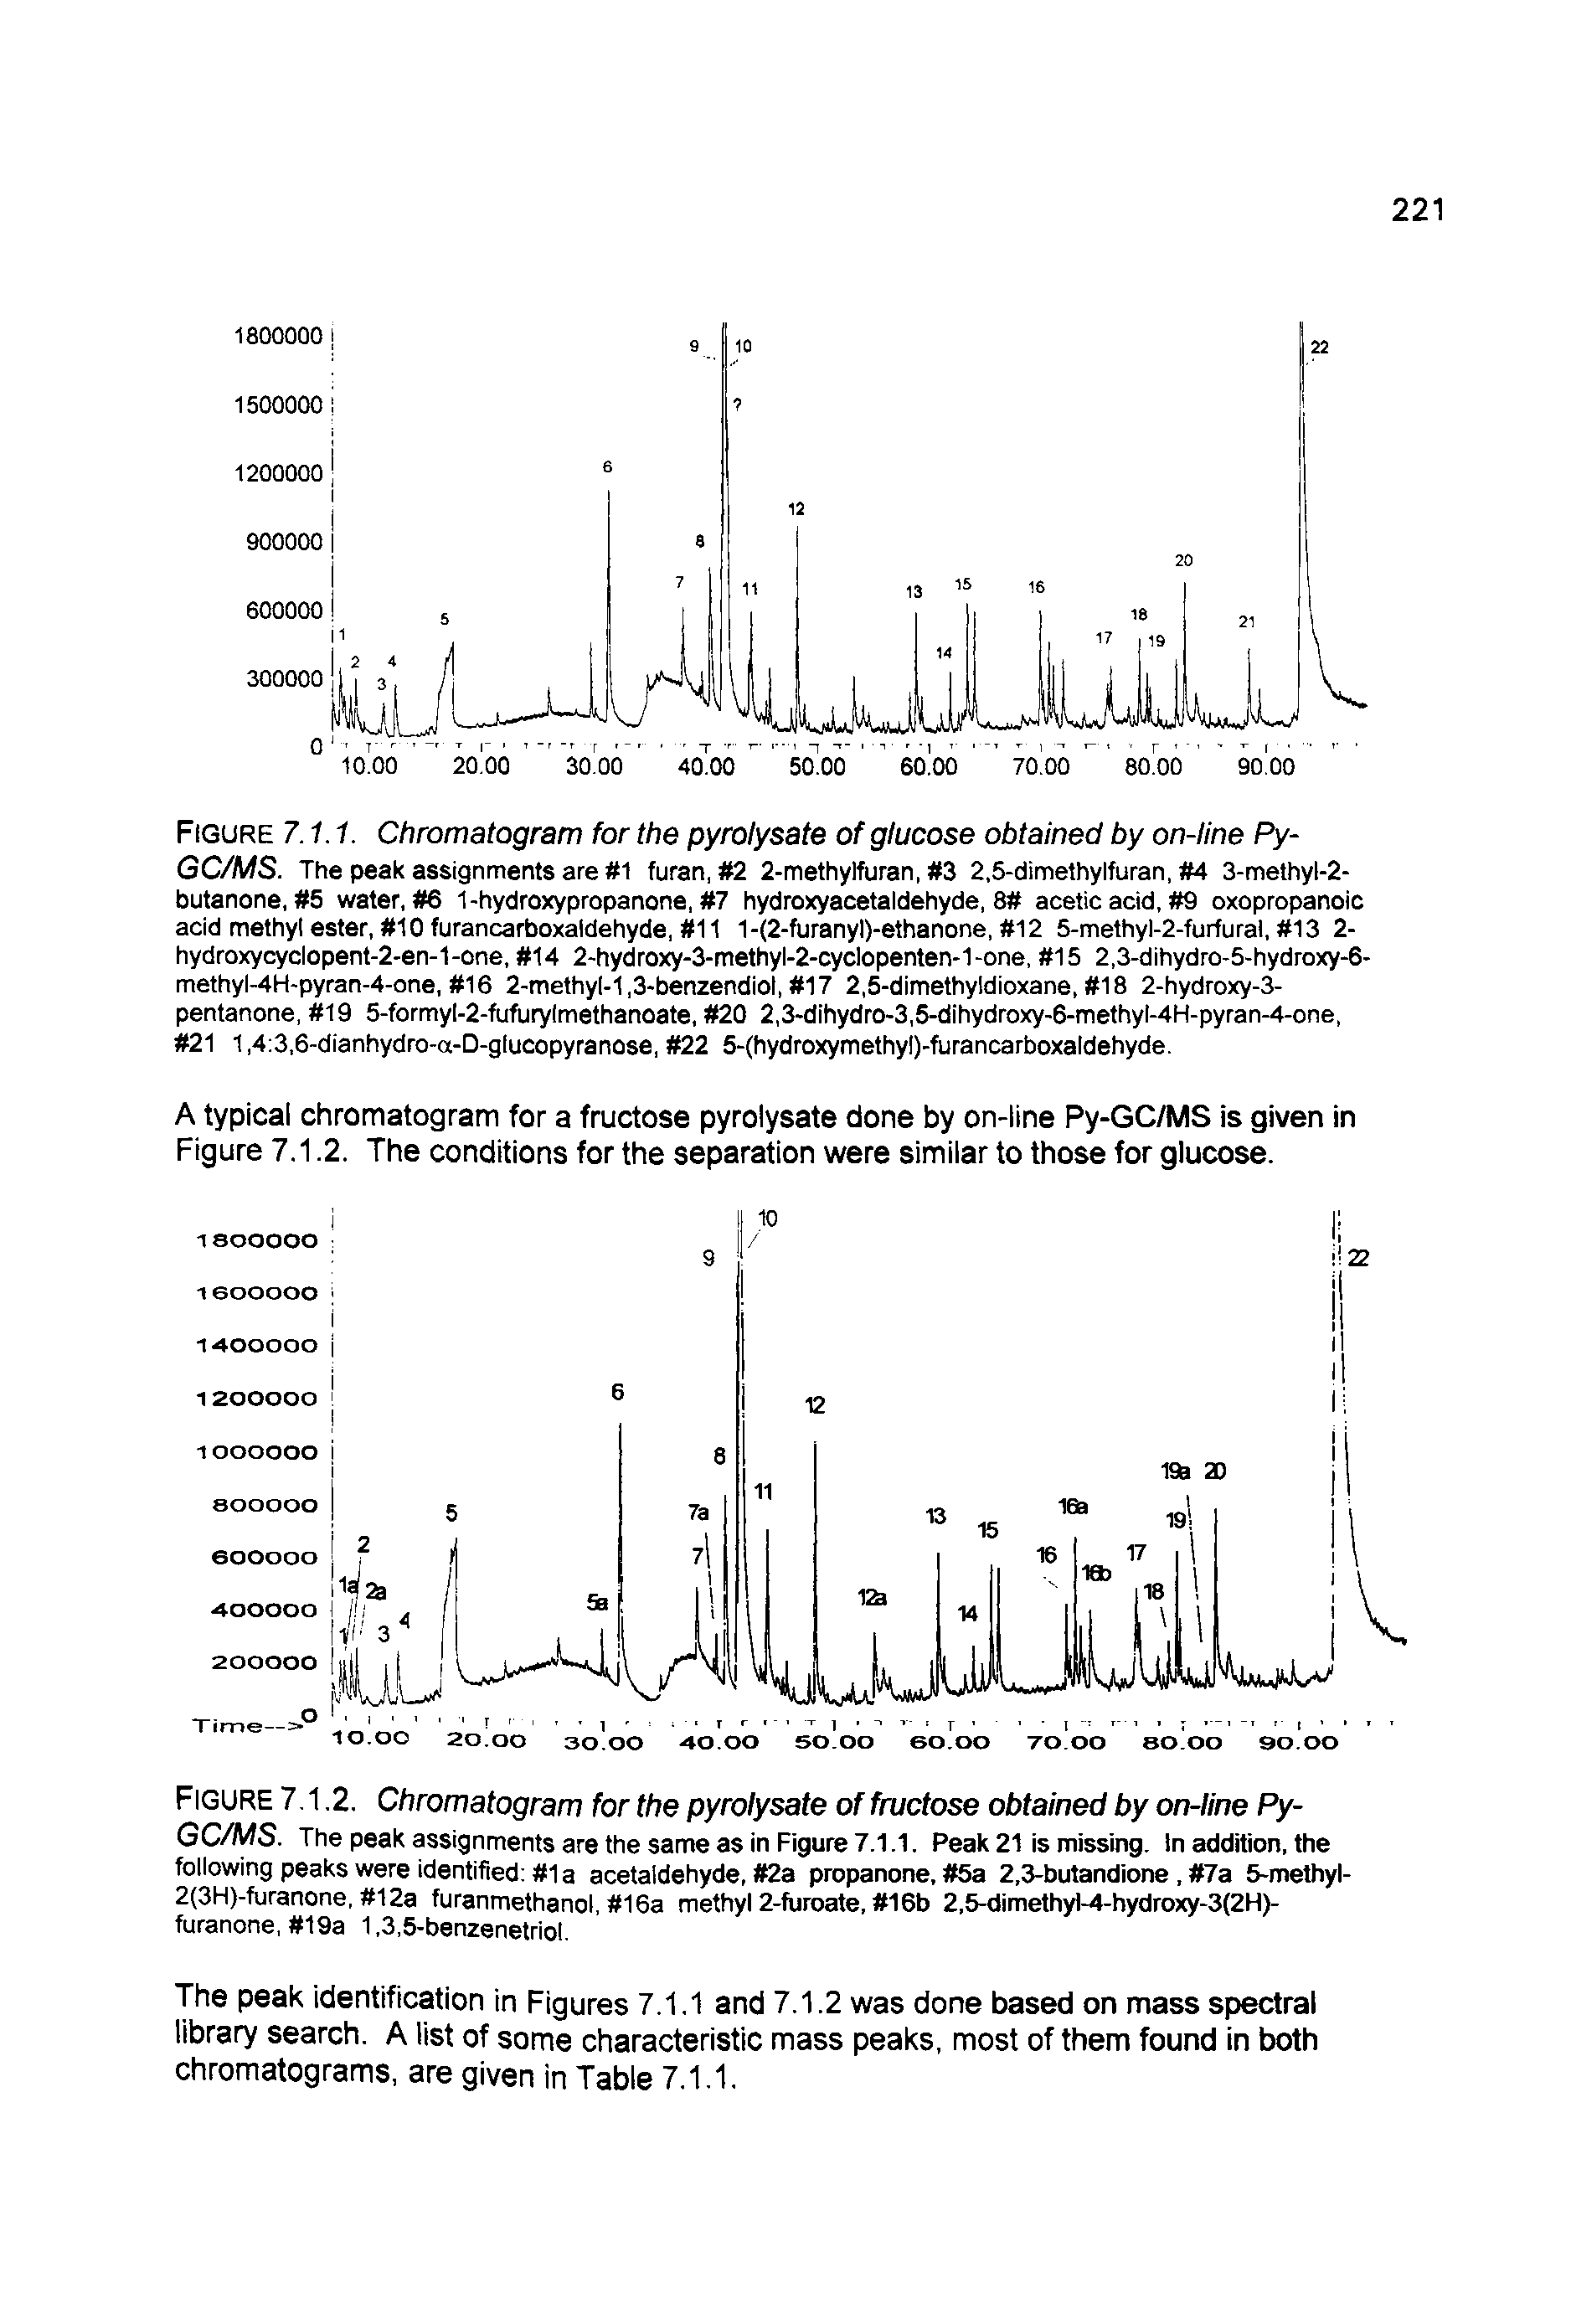 Figure 7.1.2. Chromatogram for the pyrolysate of fructose obtained by on-line Py-GC/MS. The peak assignments are the same as in Figure 7.1.1. Peak 21 is missing. In addition, the following peaks were identified 1 a acetaldehyde, 2a propanone, 5a 2,3-butandione, 7a 5-methyl-2(3H)-furanone, 12a furanmethanol, 16a methyl 2-furoate, 16b 2,5-dimethyl-4-hydroxy-3(2H)-furanone, 19a 1,3,5-benzenetriol.